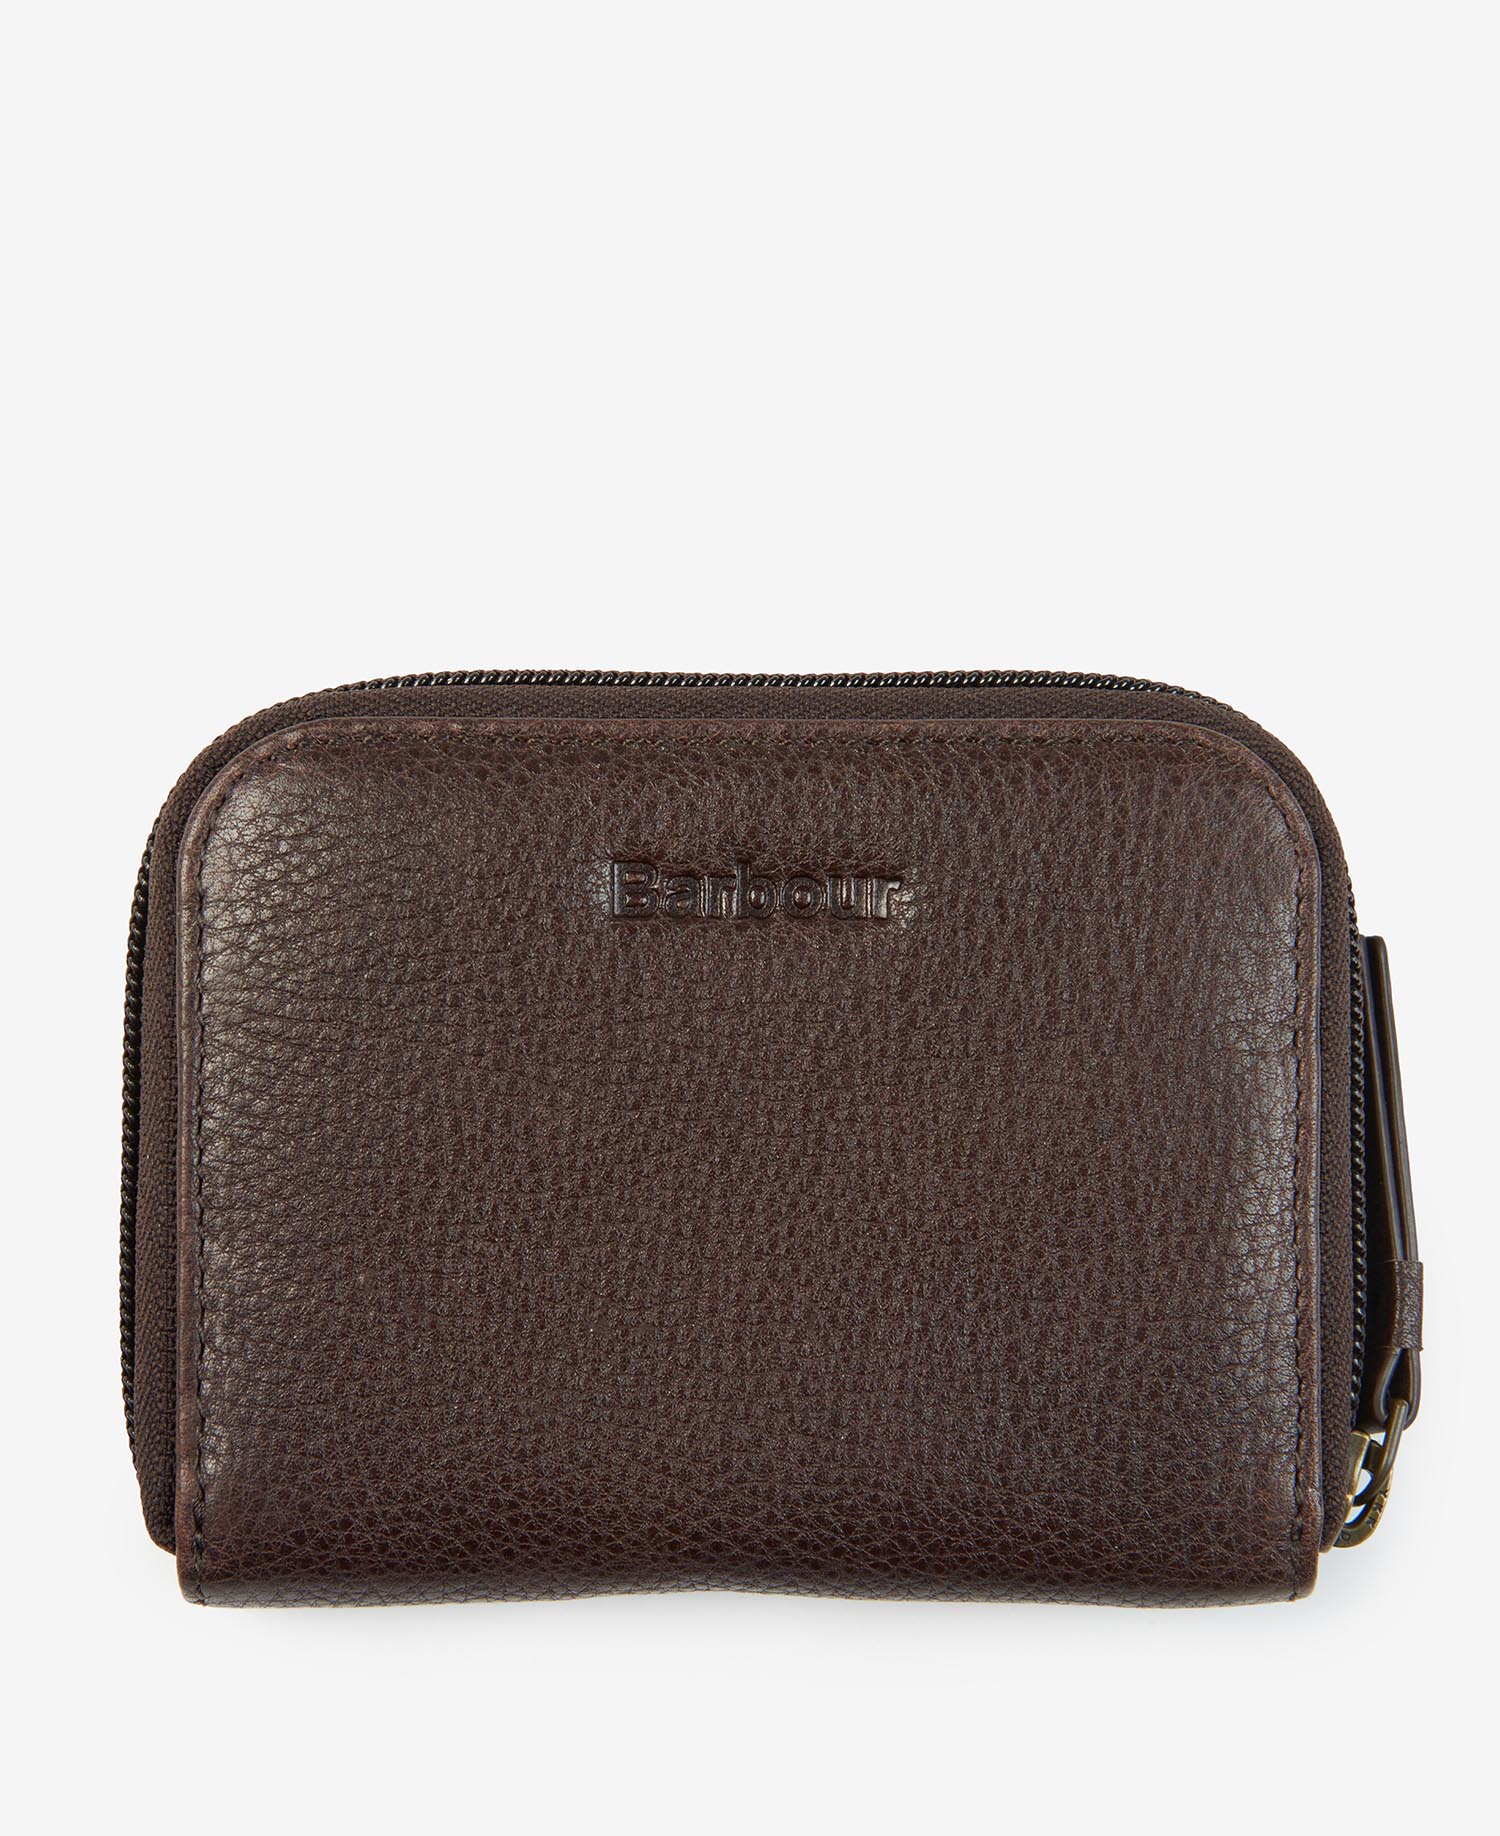 Barbour Laie Leather Purse Dark Brown